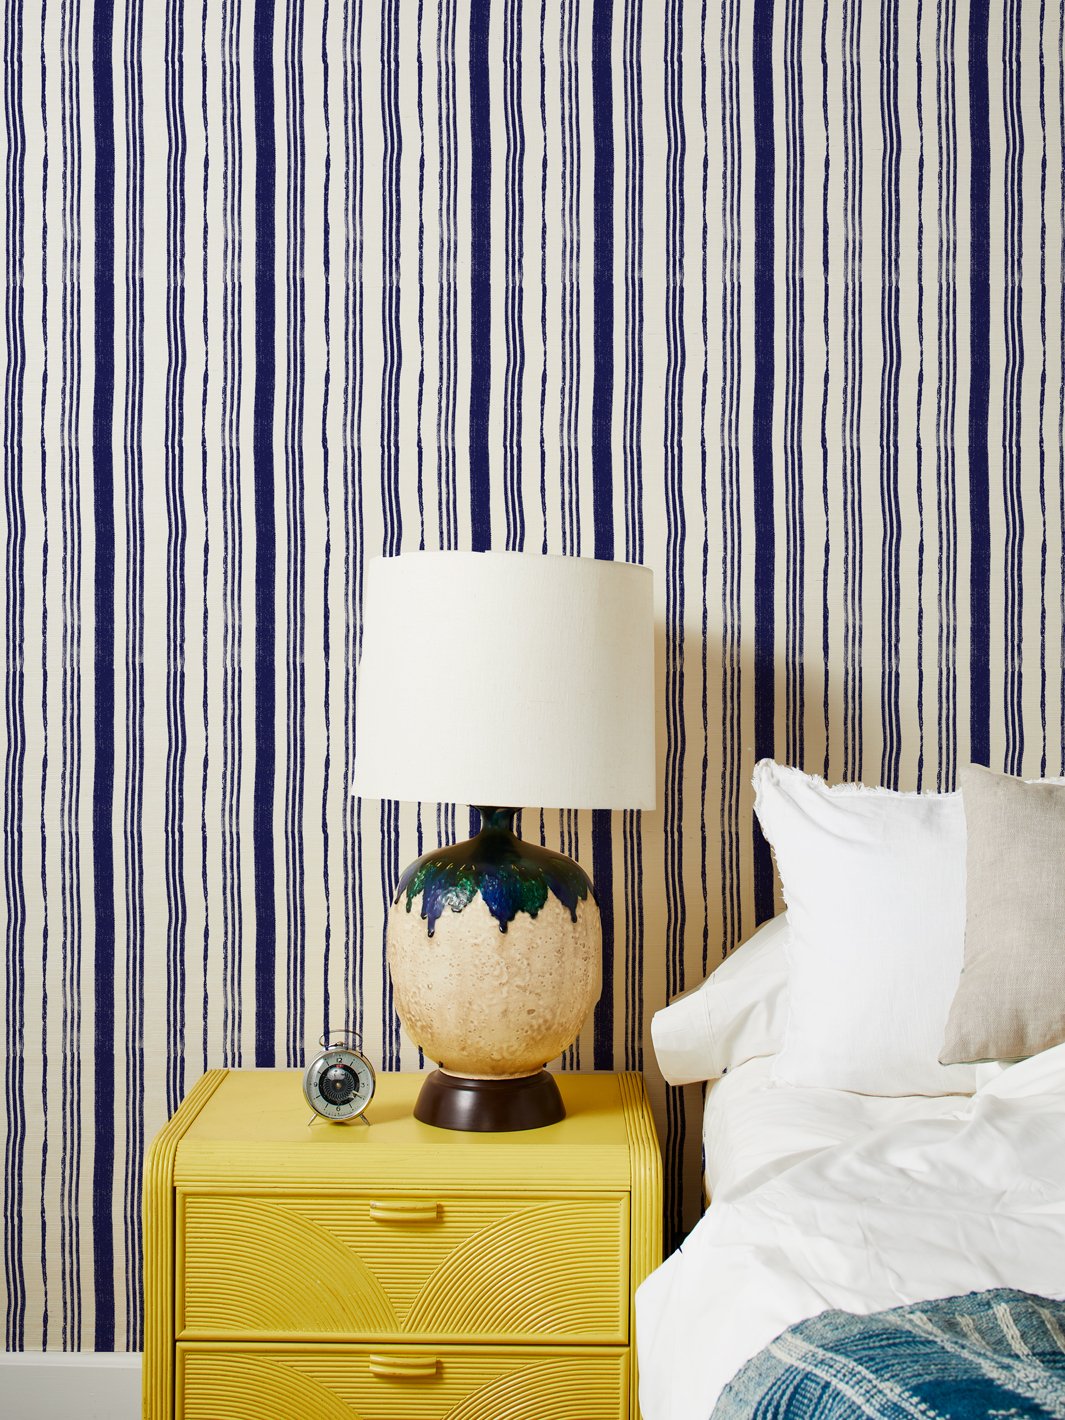 'Painted Stripes' Grasscloth' Wallpaper by Nathan Turner - Navy